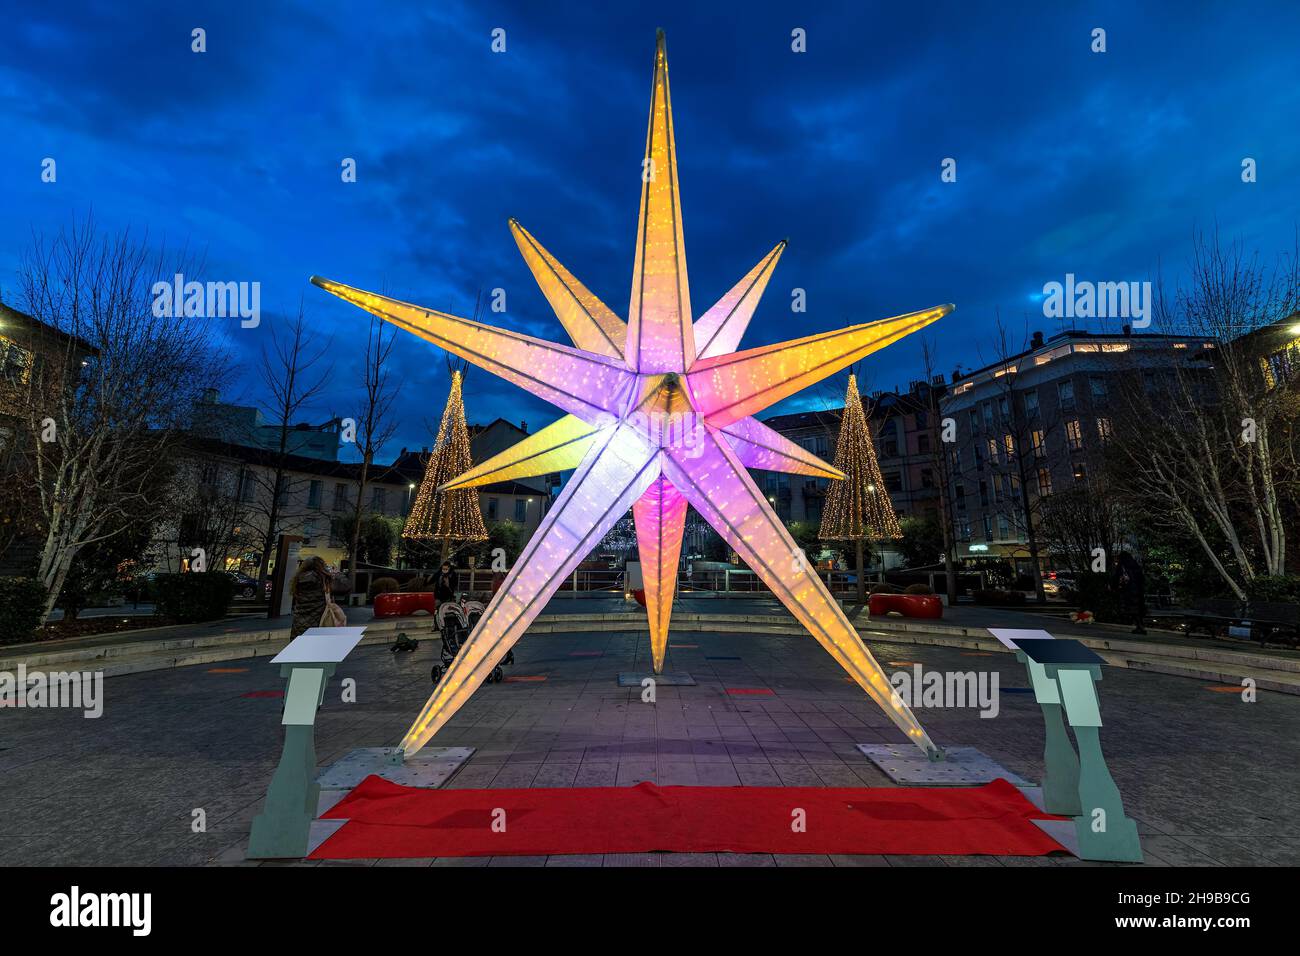 Illuminated Christmas installation on town square in the evening in Alba, Piedmont, Northern Italy. Stock Photo